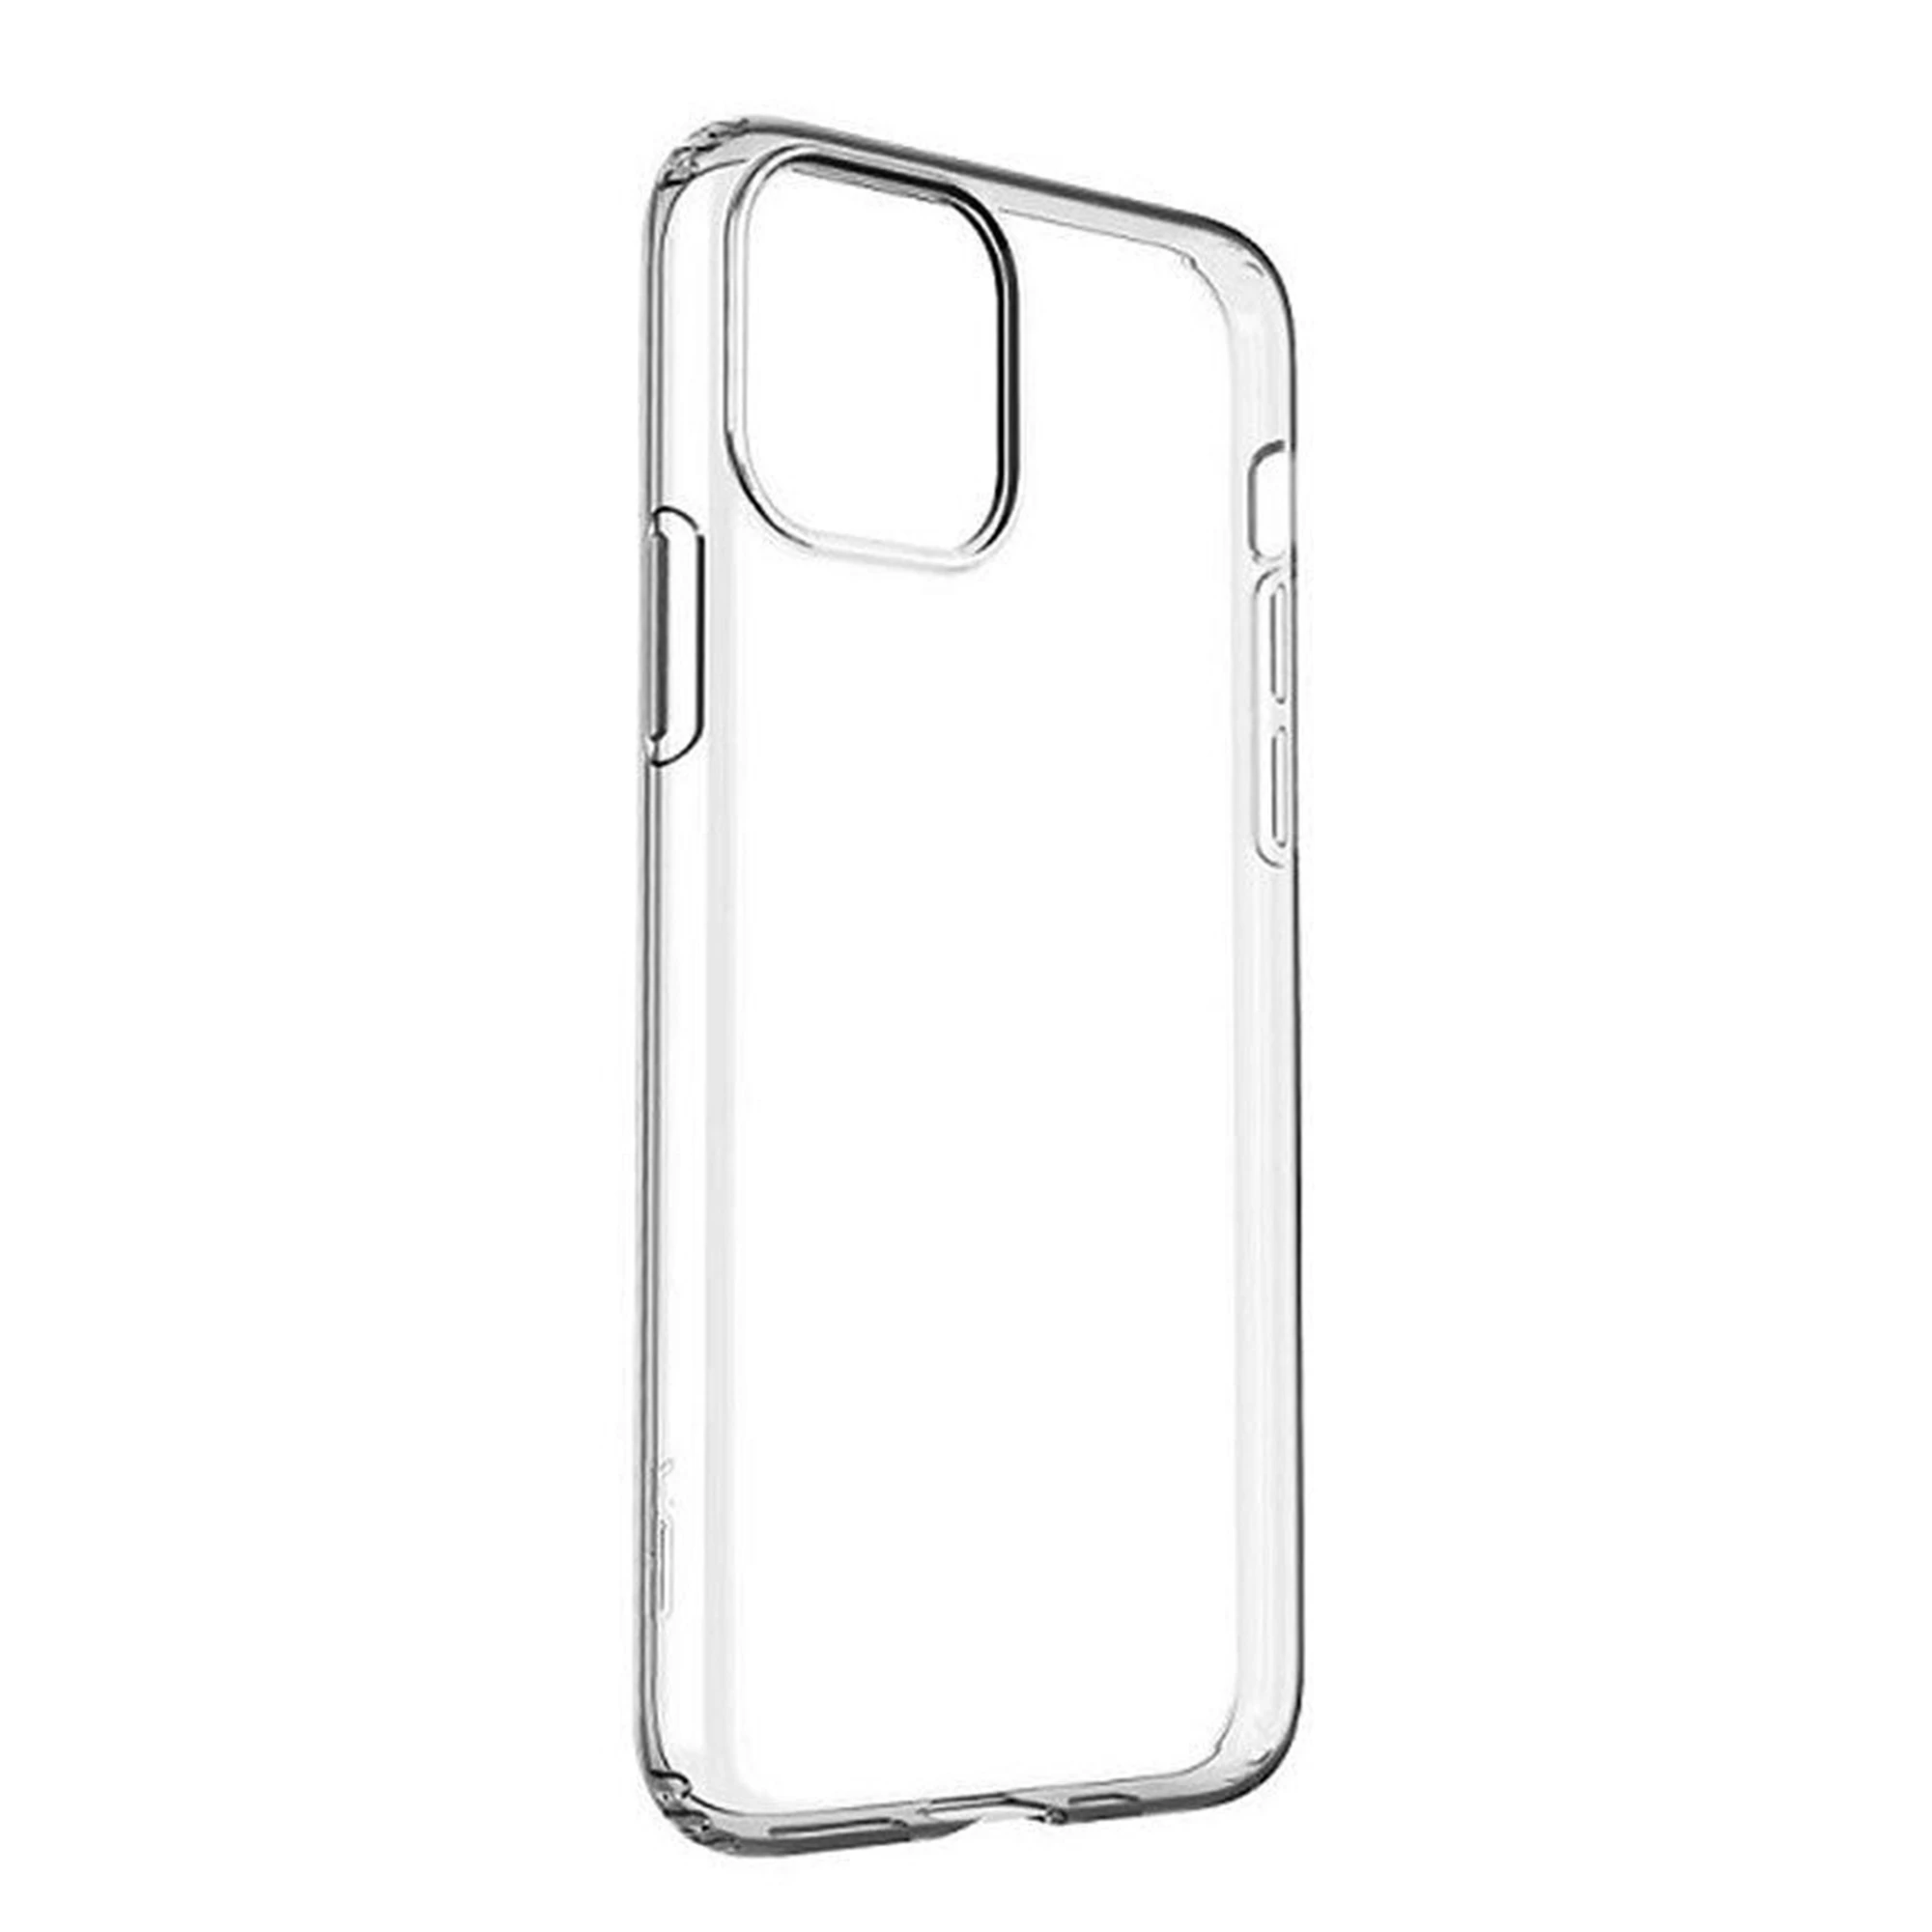 Rock Pure Series Protection for iPhone 12 Pro Max Case - Transparent